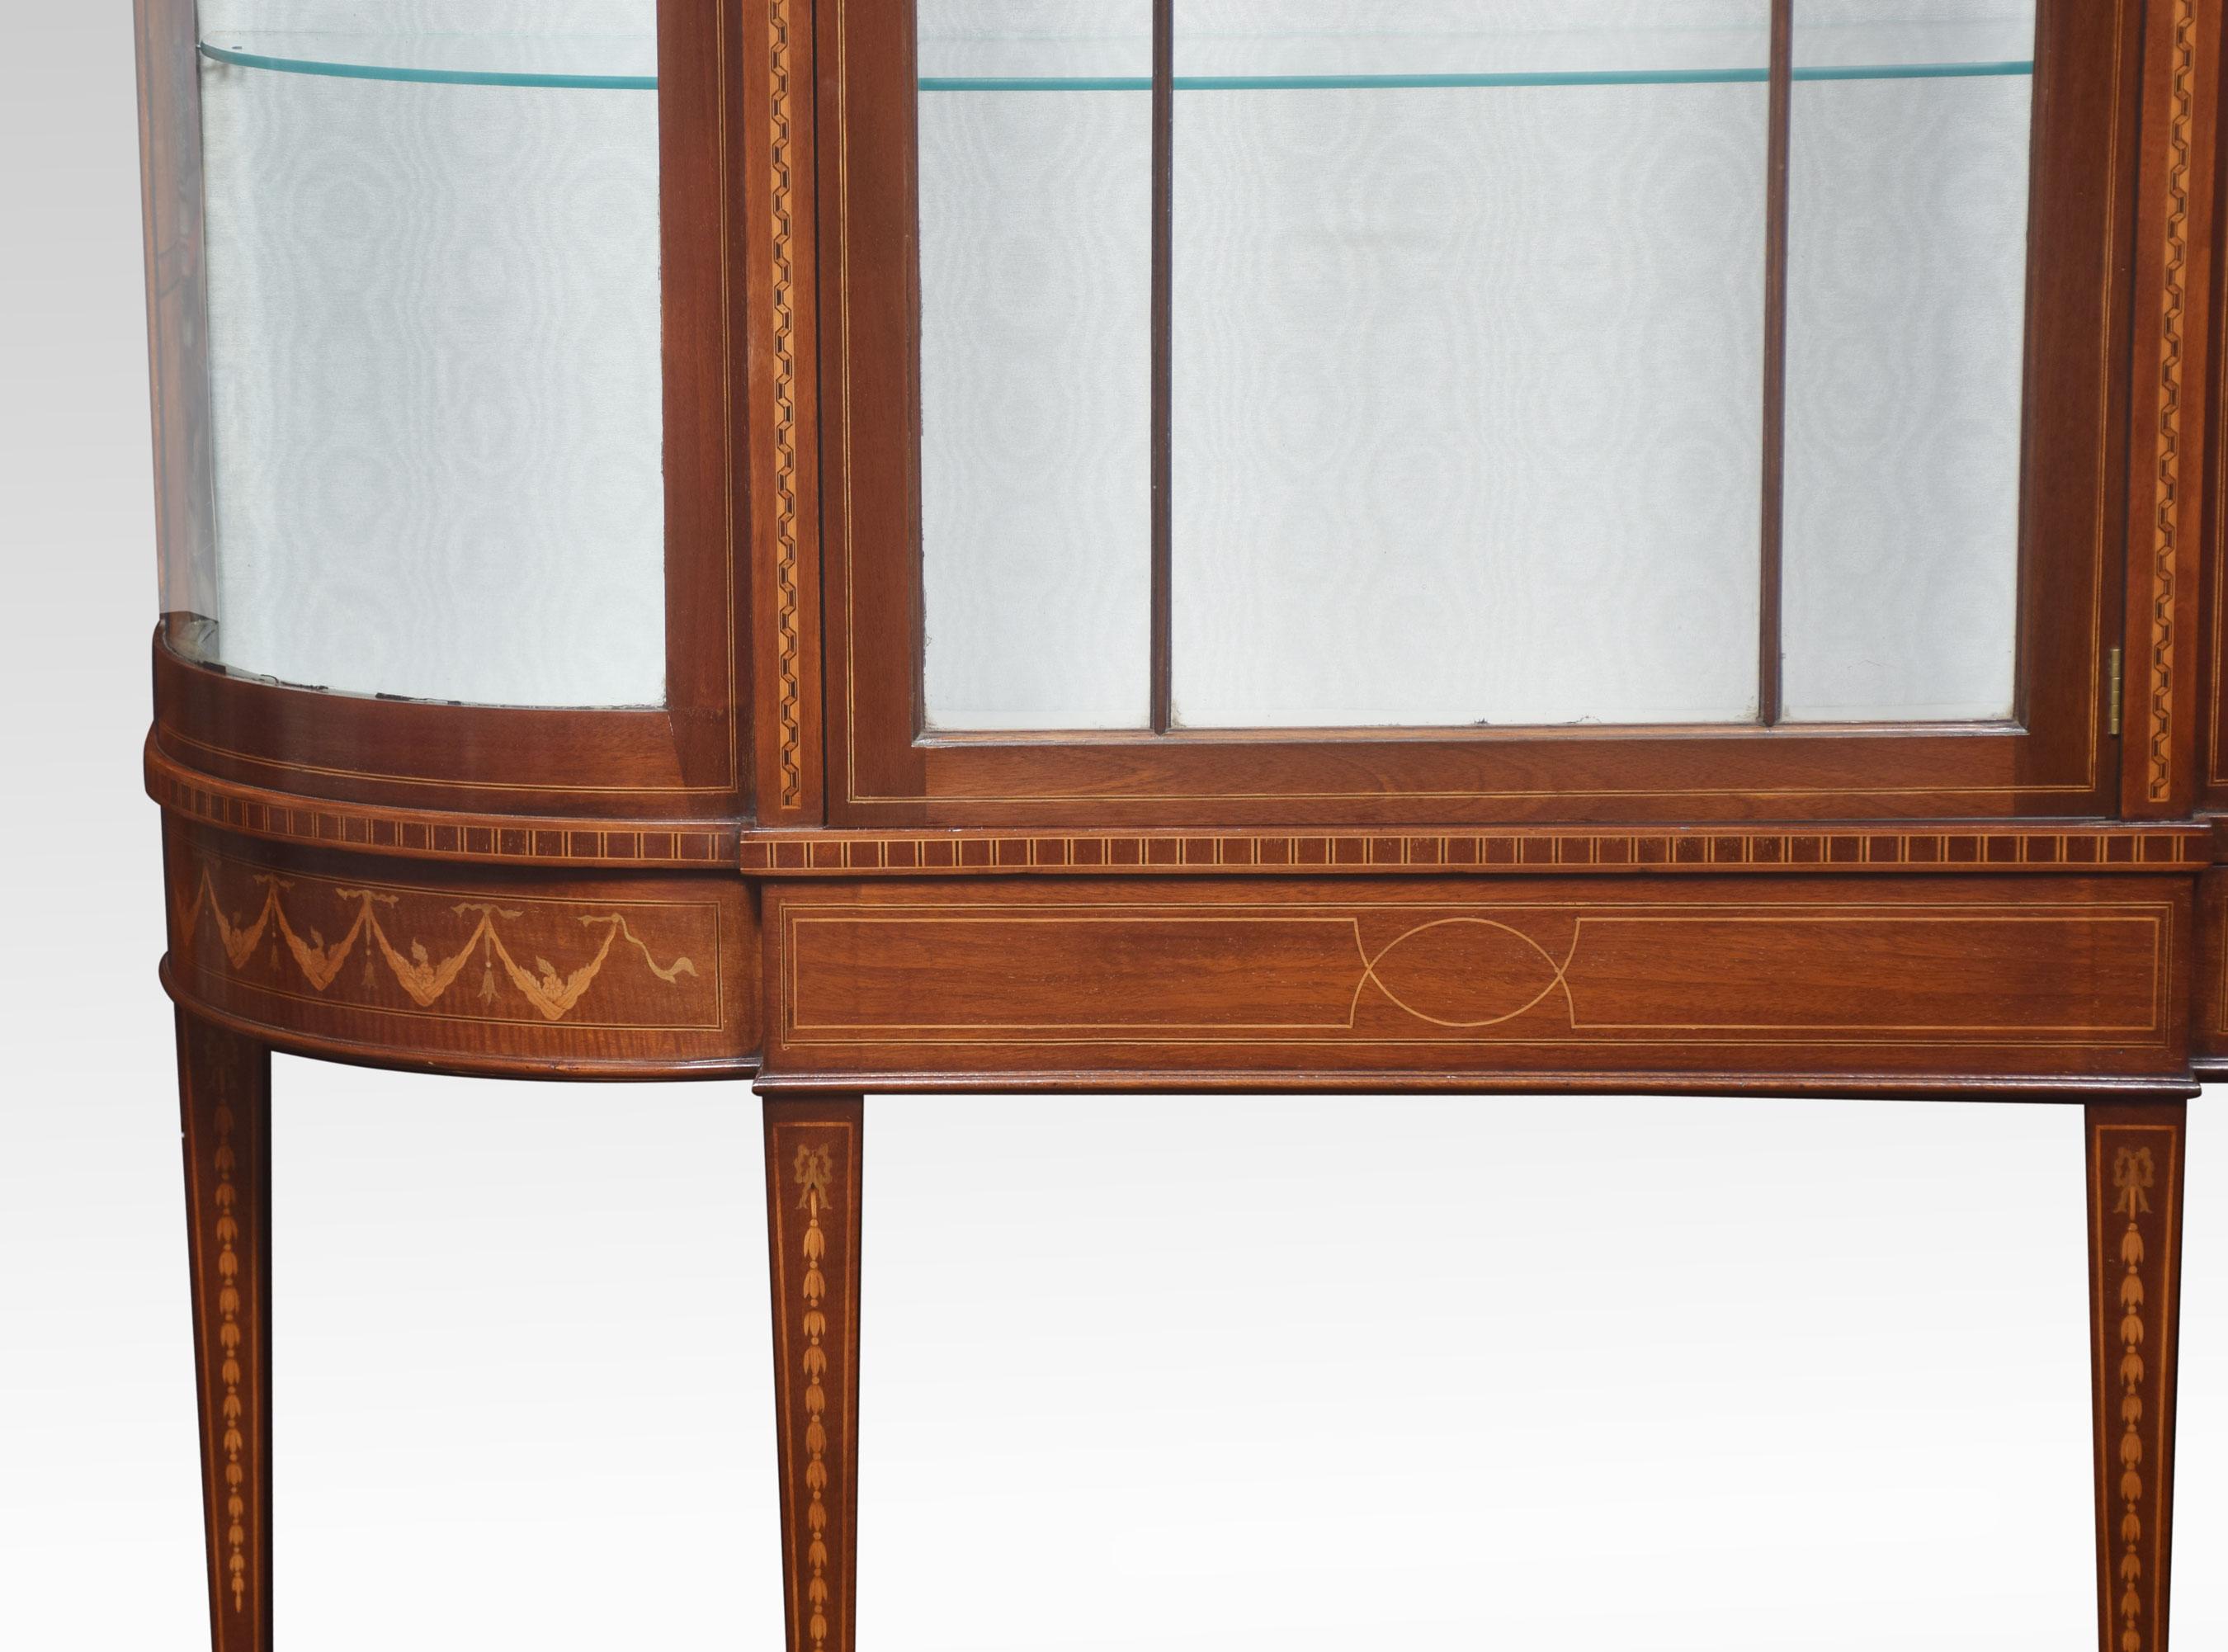 Mahogany bow fronted display cabinet the molded cornice above large central single door opening to reveal the upholstered interior and two glazed shelves. All raised up on tapering legs united by under tier.
Dimensions
Height 75 inches
Length 50